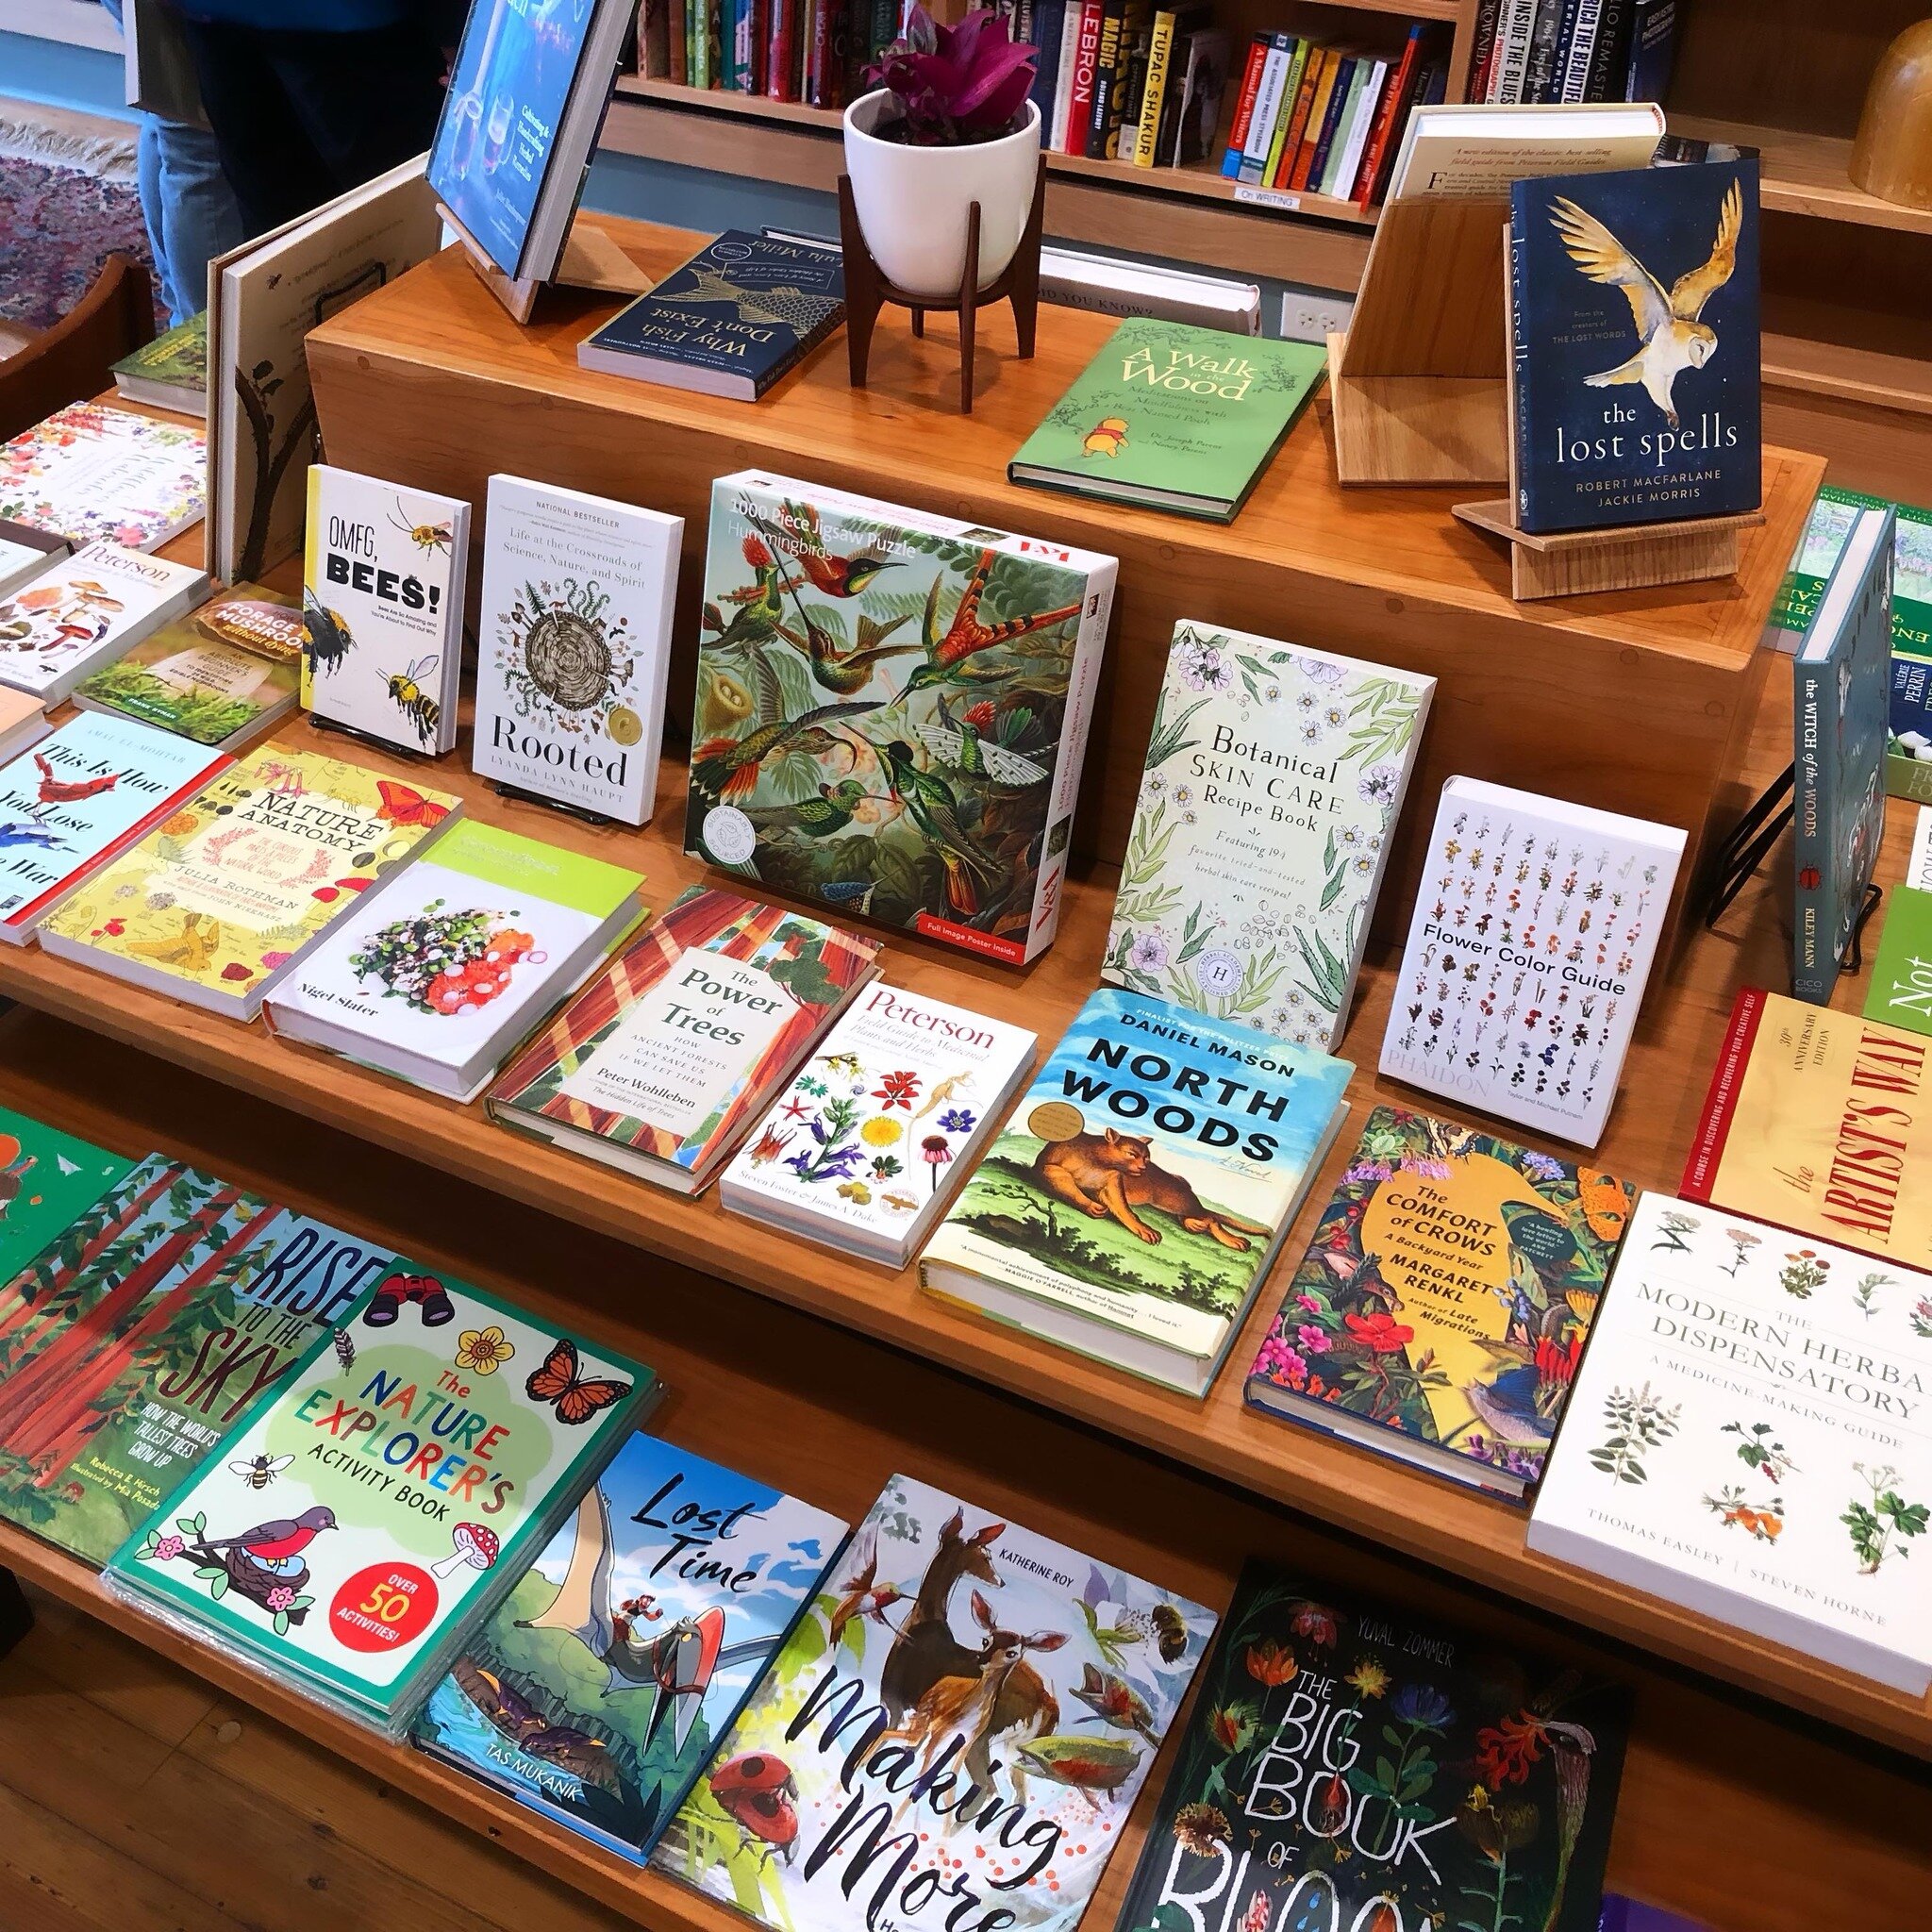 We&rsquo;re ready for all things Spring here at Glendora Bookshop 🌸🌱 We&rsquo;ve handpicked some titles we hope are inspiring to you as well. Open til 6pm today and tomorrow 🌞 see you soon! 

*****

#independentbookstore #booklovers #springbooks #